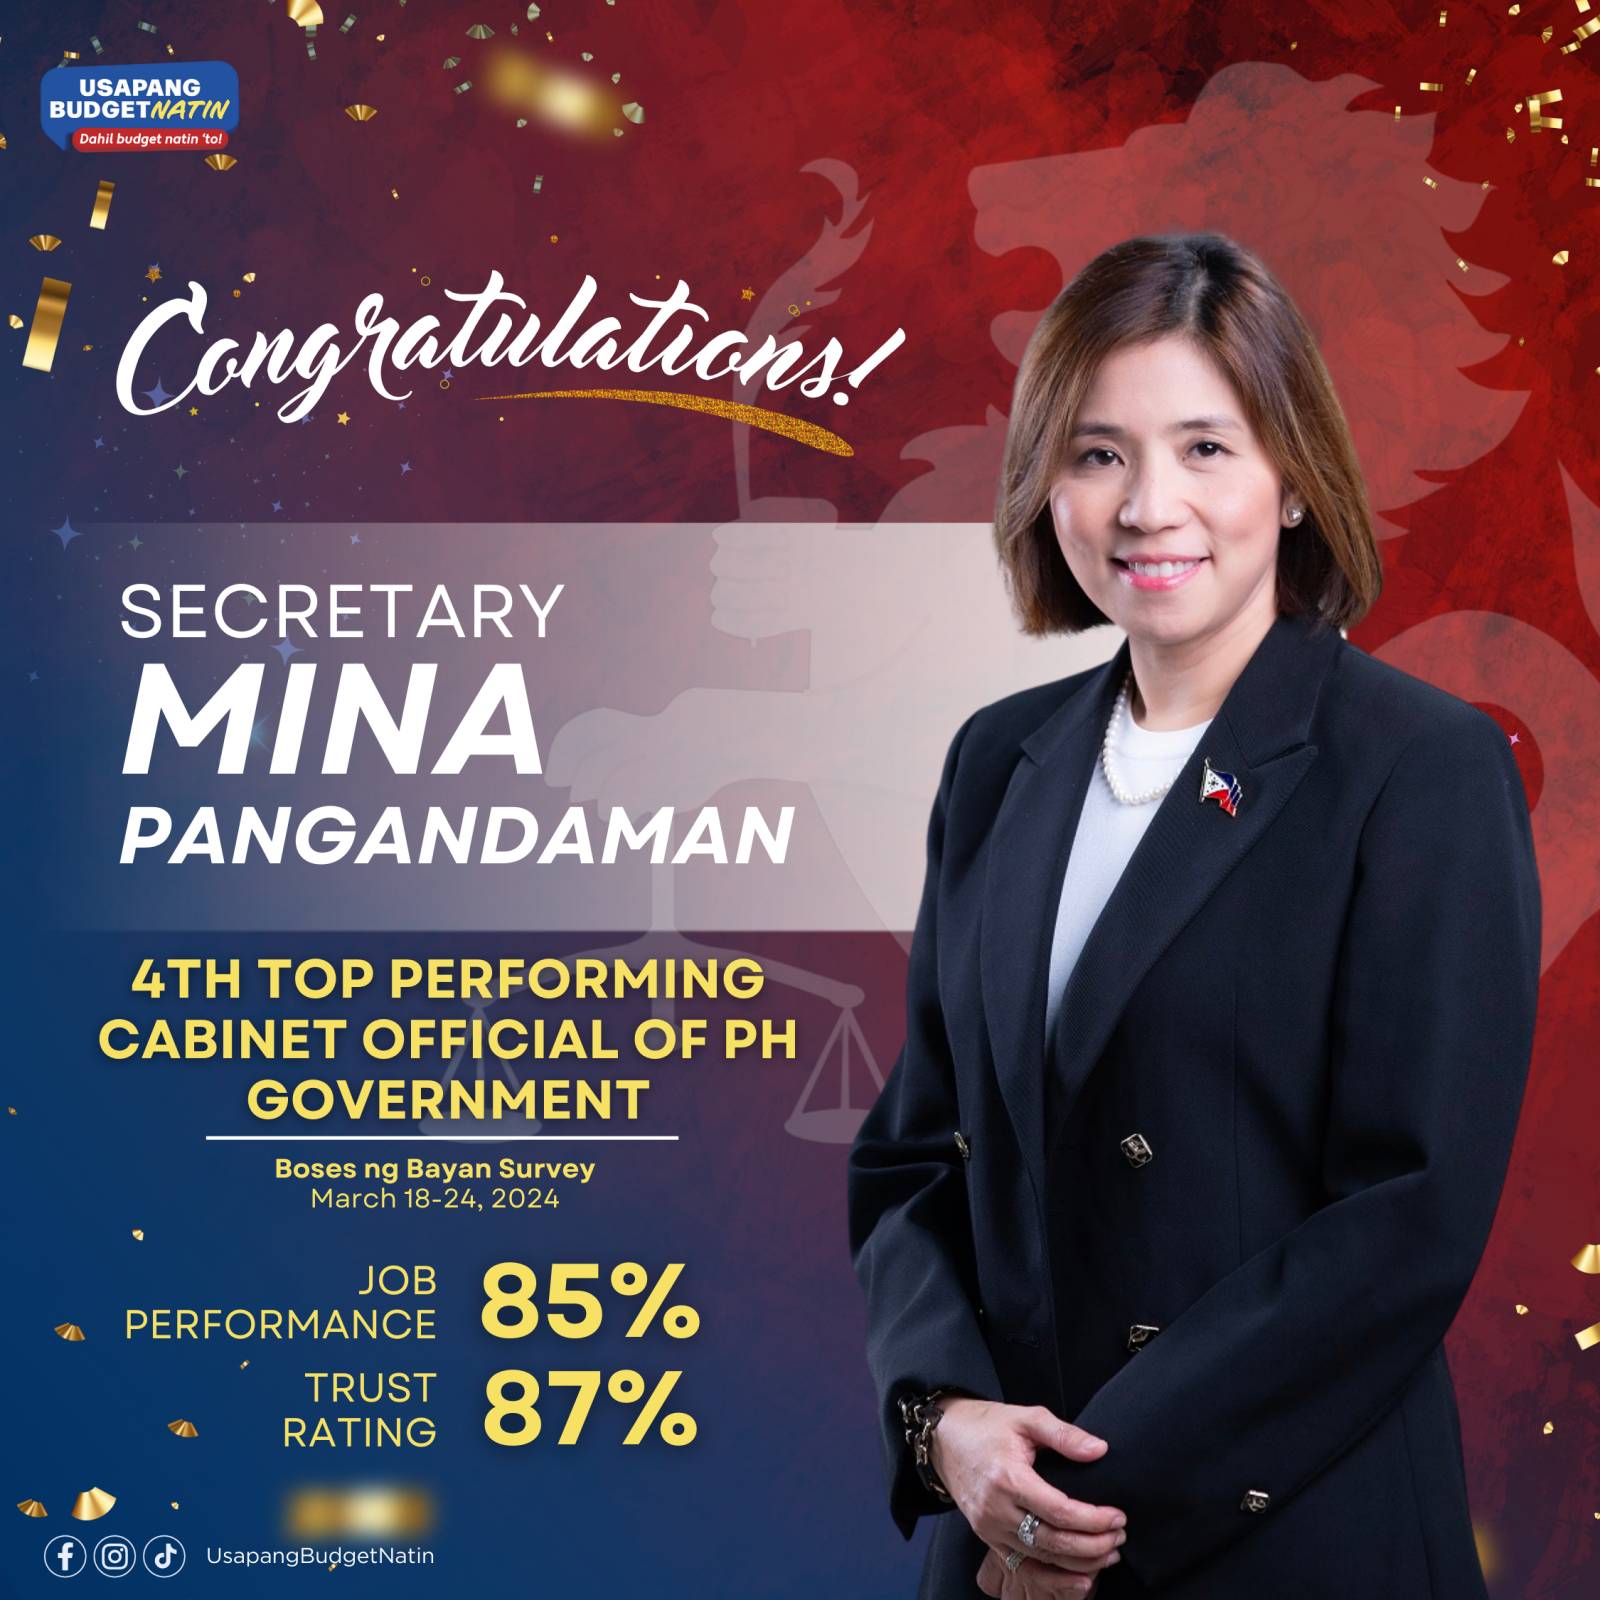 4th Top Performing Cabinet Official